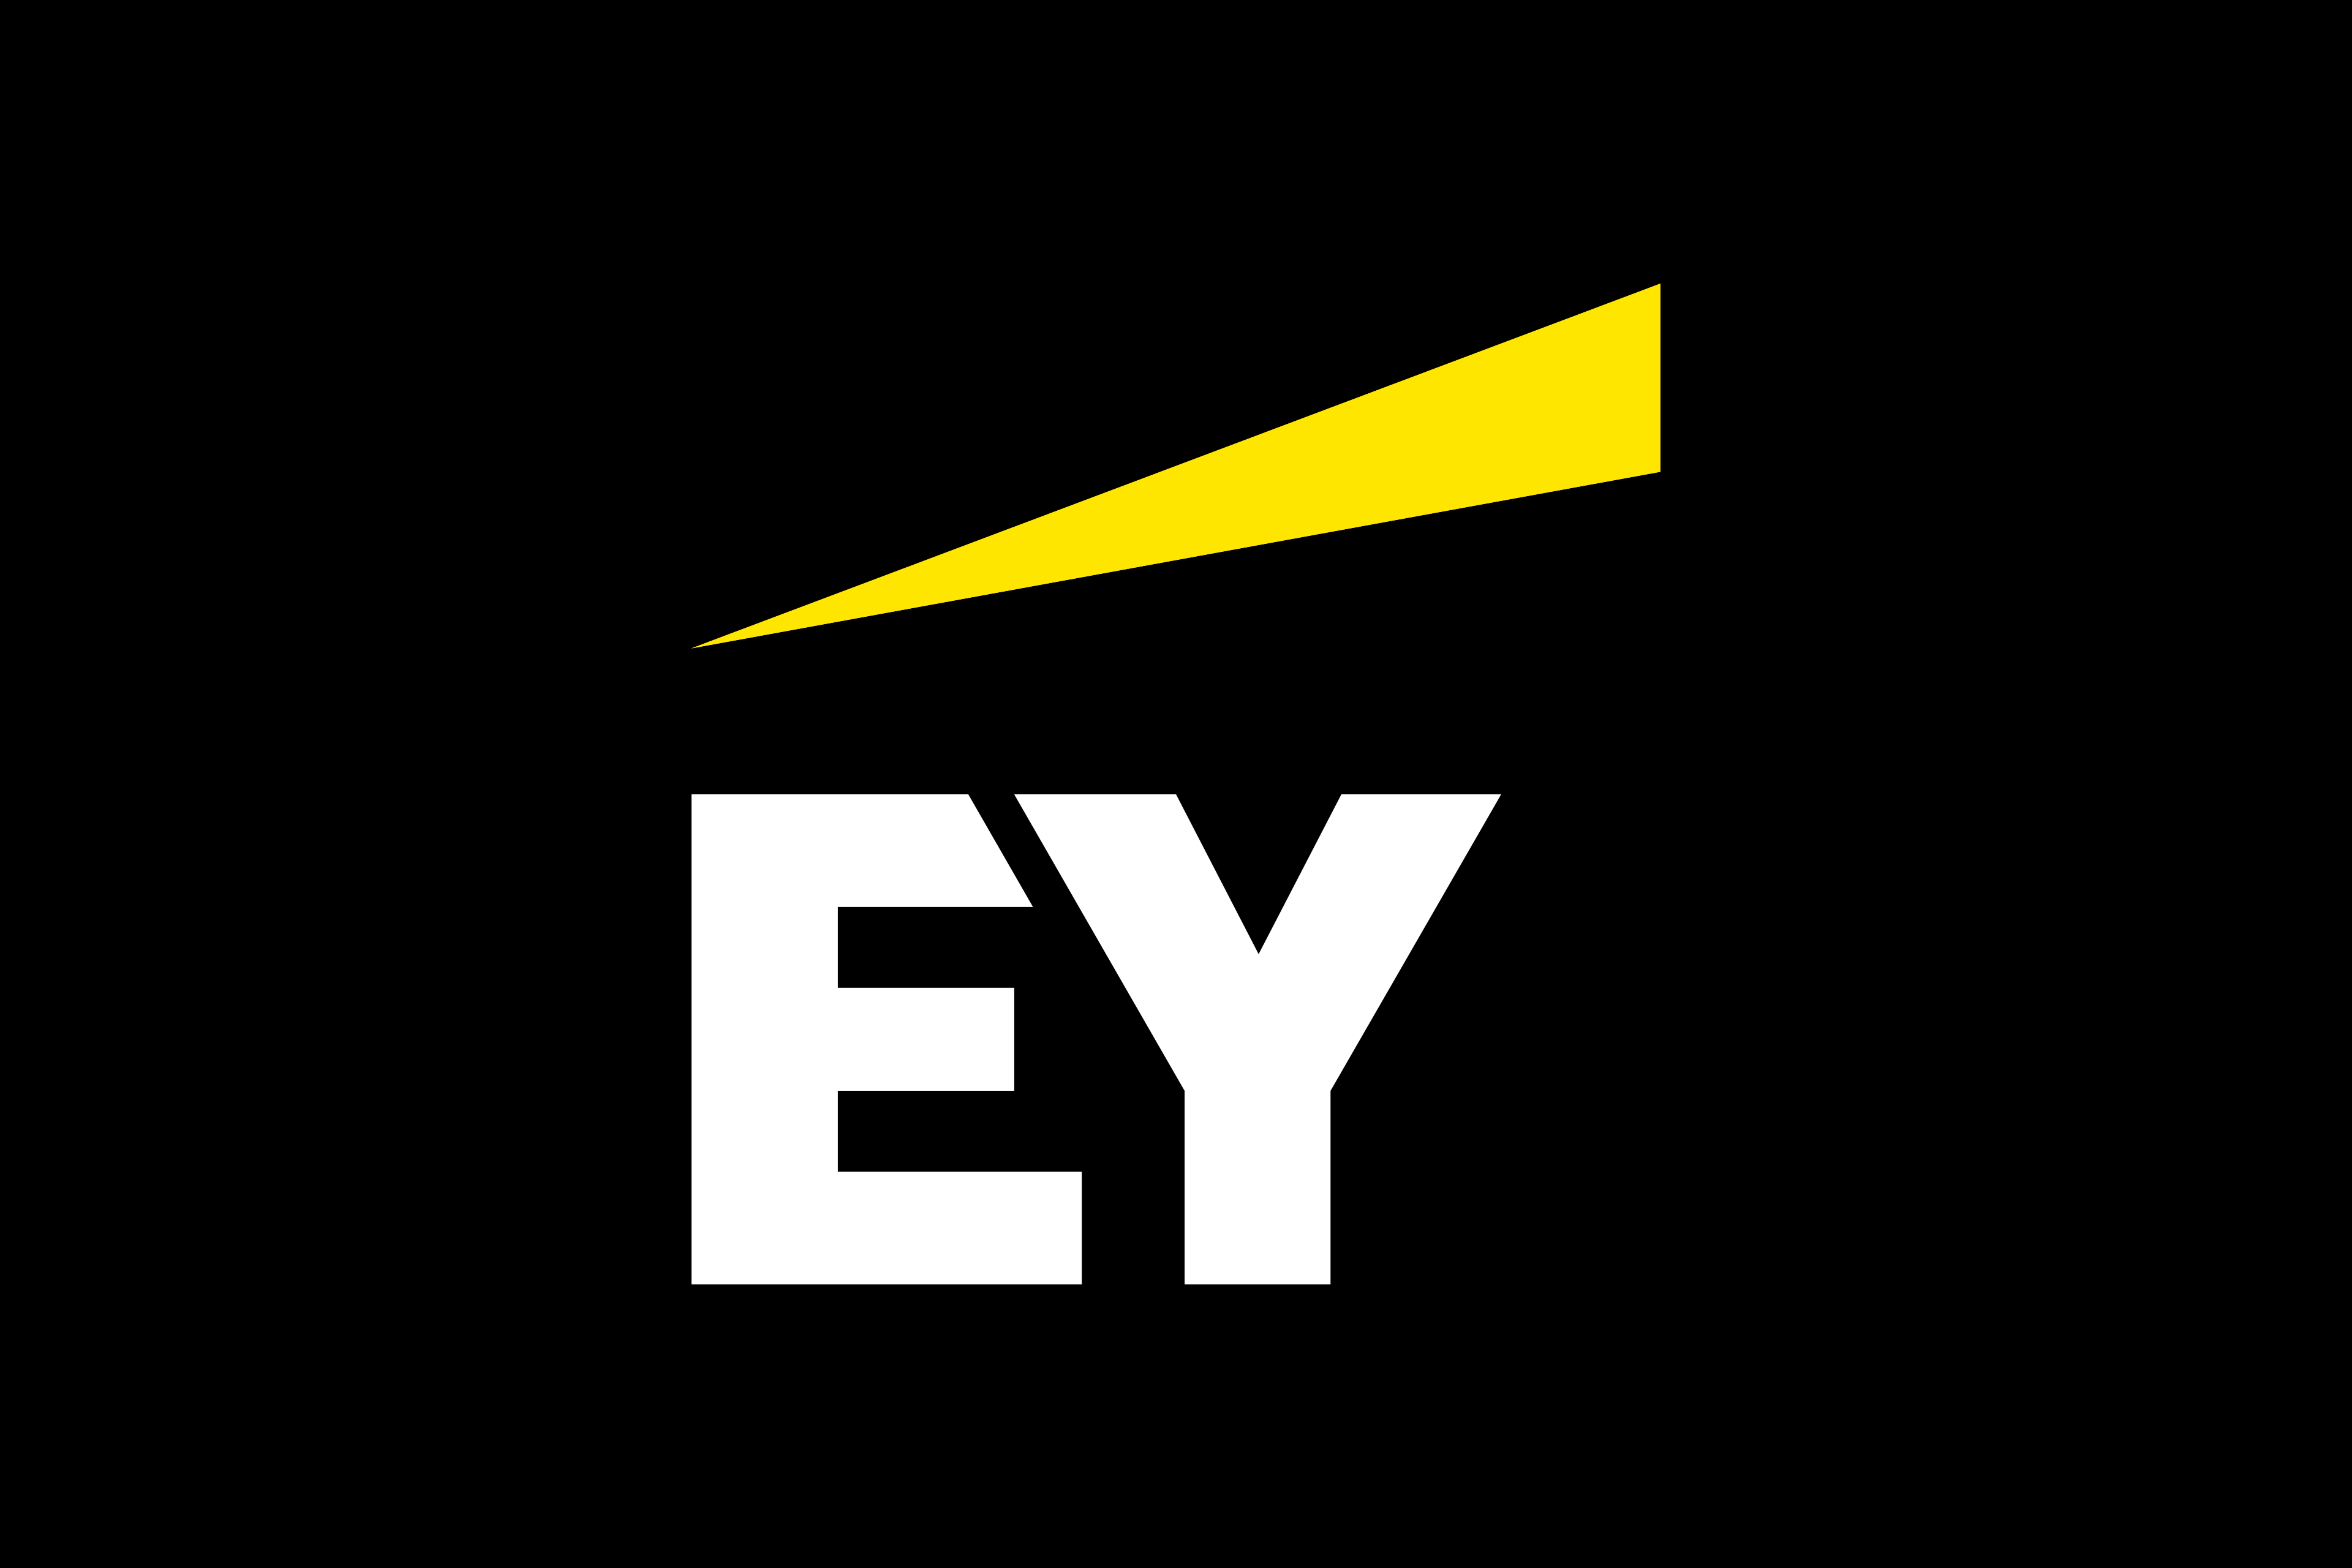 EY fined a record $100m after staff cheated in exams